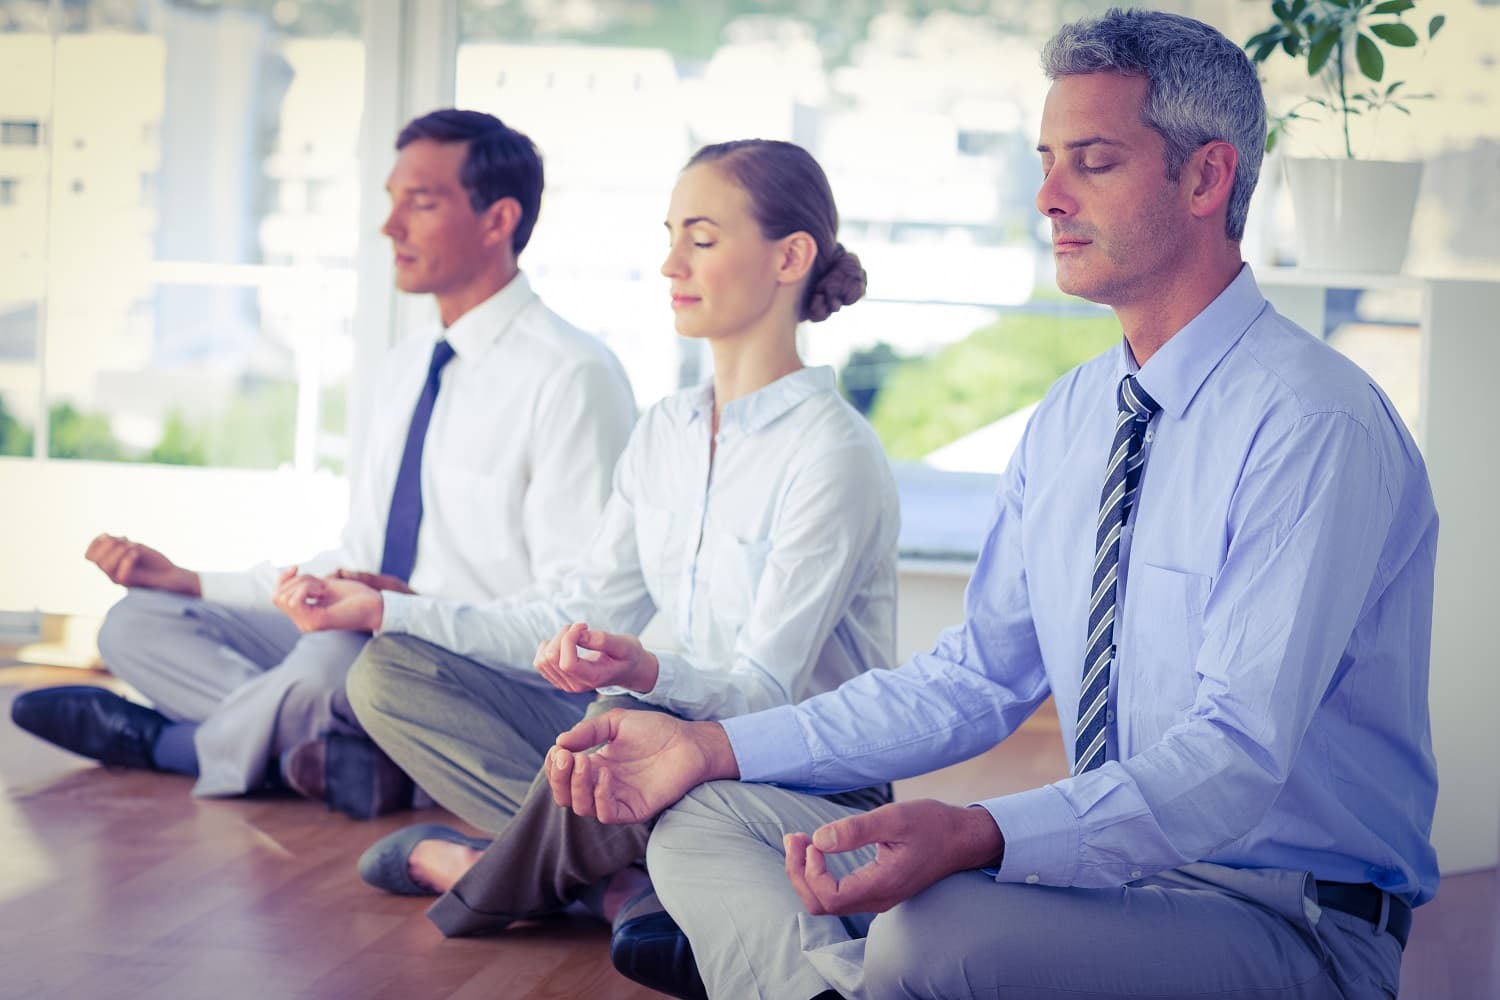 What is corporate yoga?